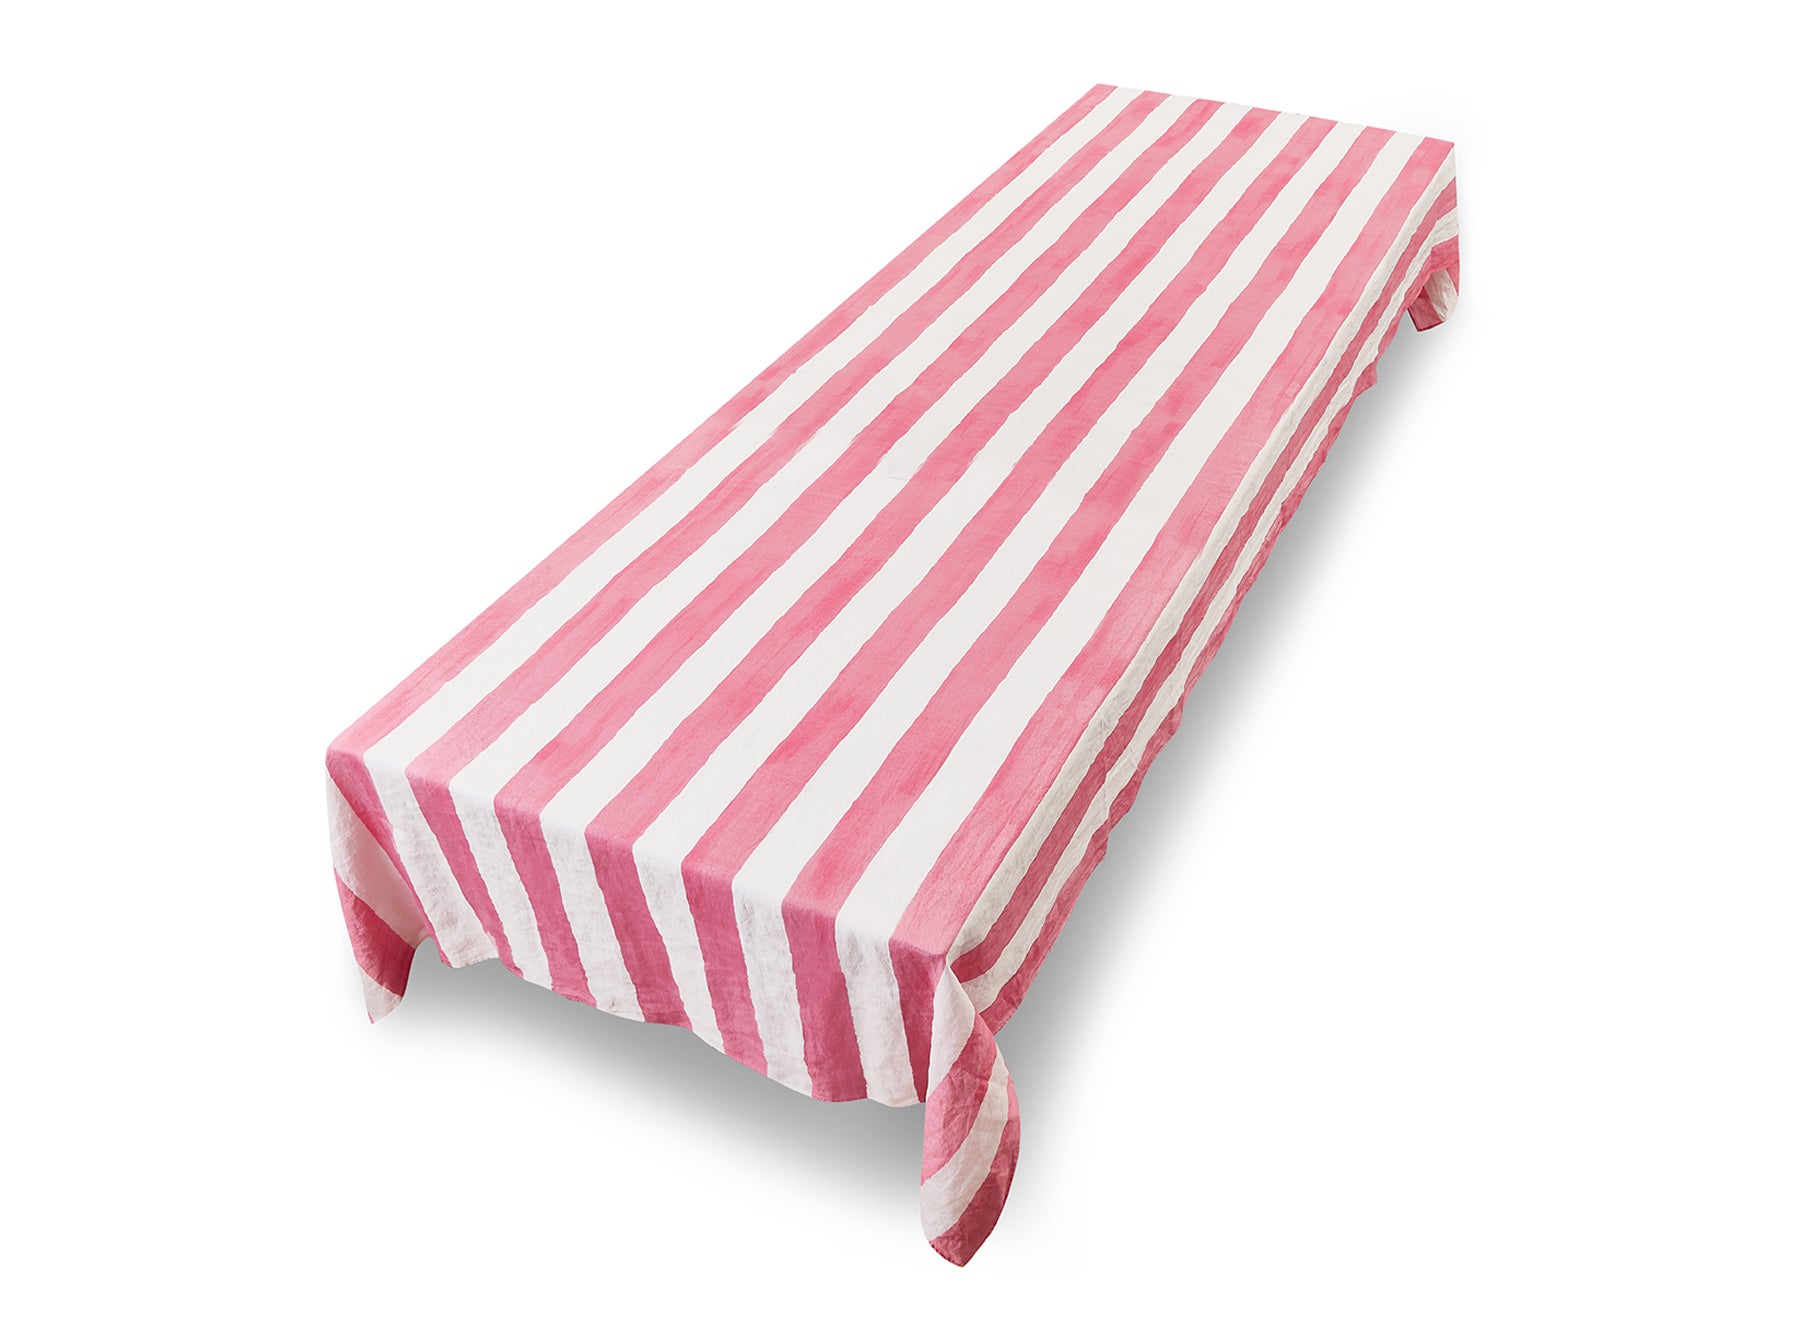 Stripe Linen Tablecloth in White & Pink